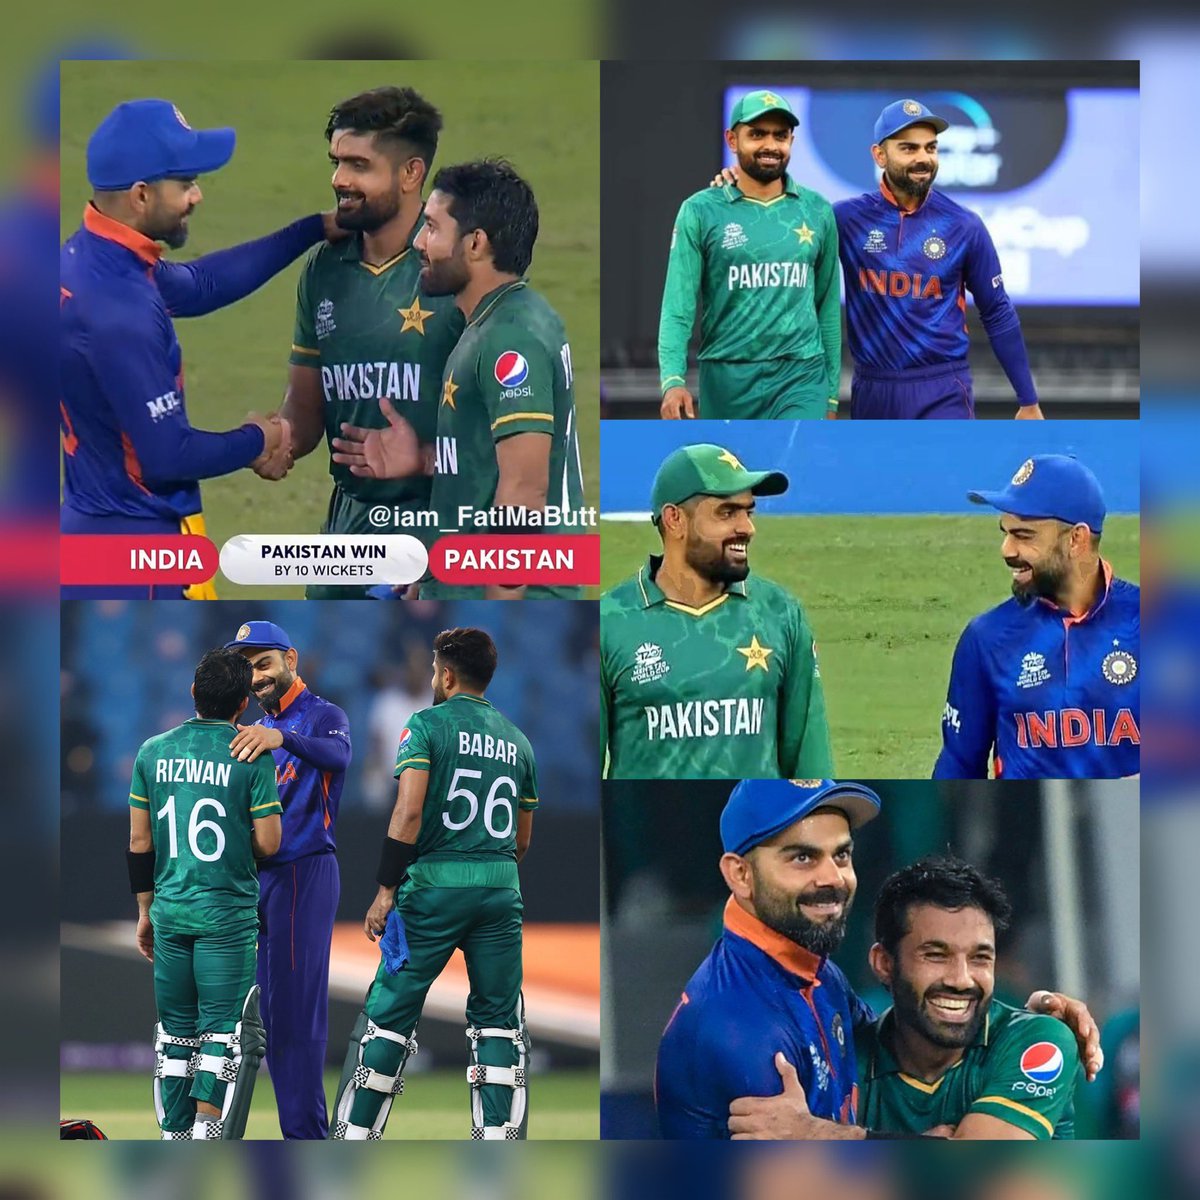 The most loving thing of #PAKvIND #T20WorldCup match was sportsman spirit and I love & enjoy that ❤
#LetPeacePrevail 🇵🇰🇮🇳
#LongLivePeace
#ViratKohli #BabarAzam 
#T20WorldCup2021